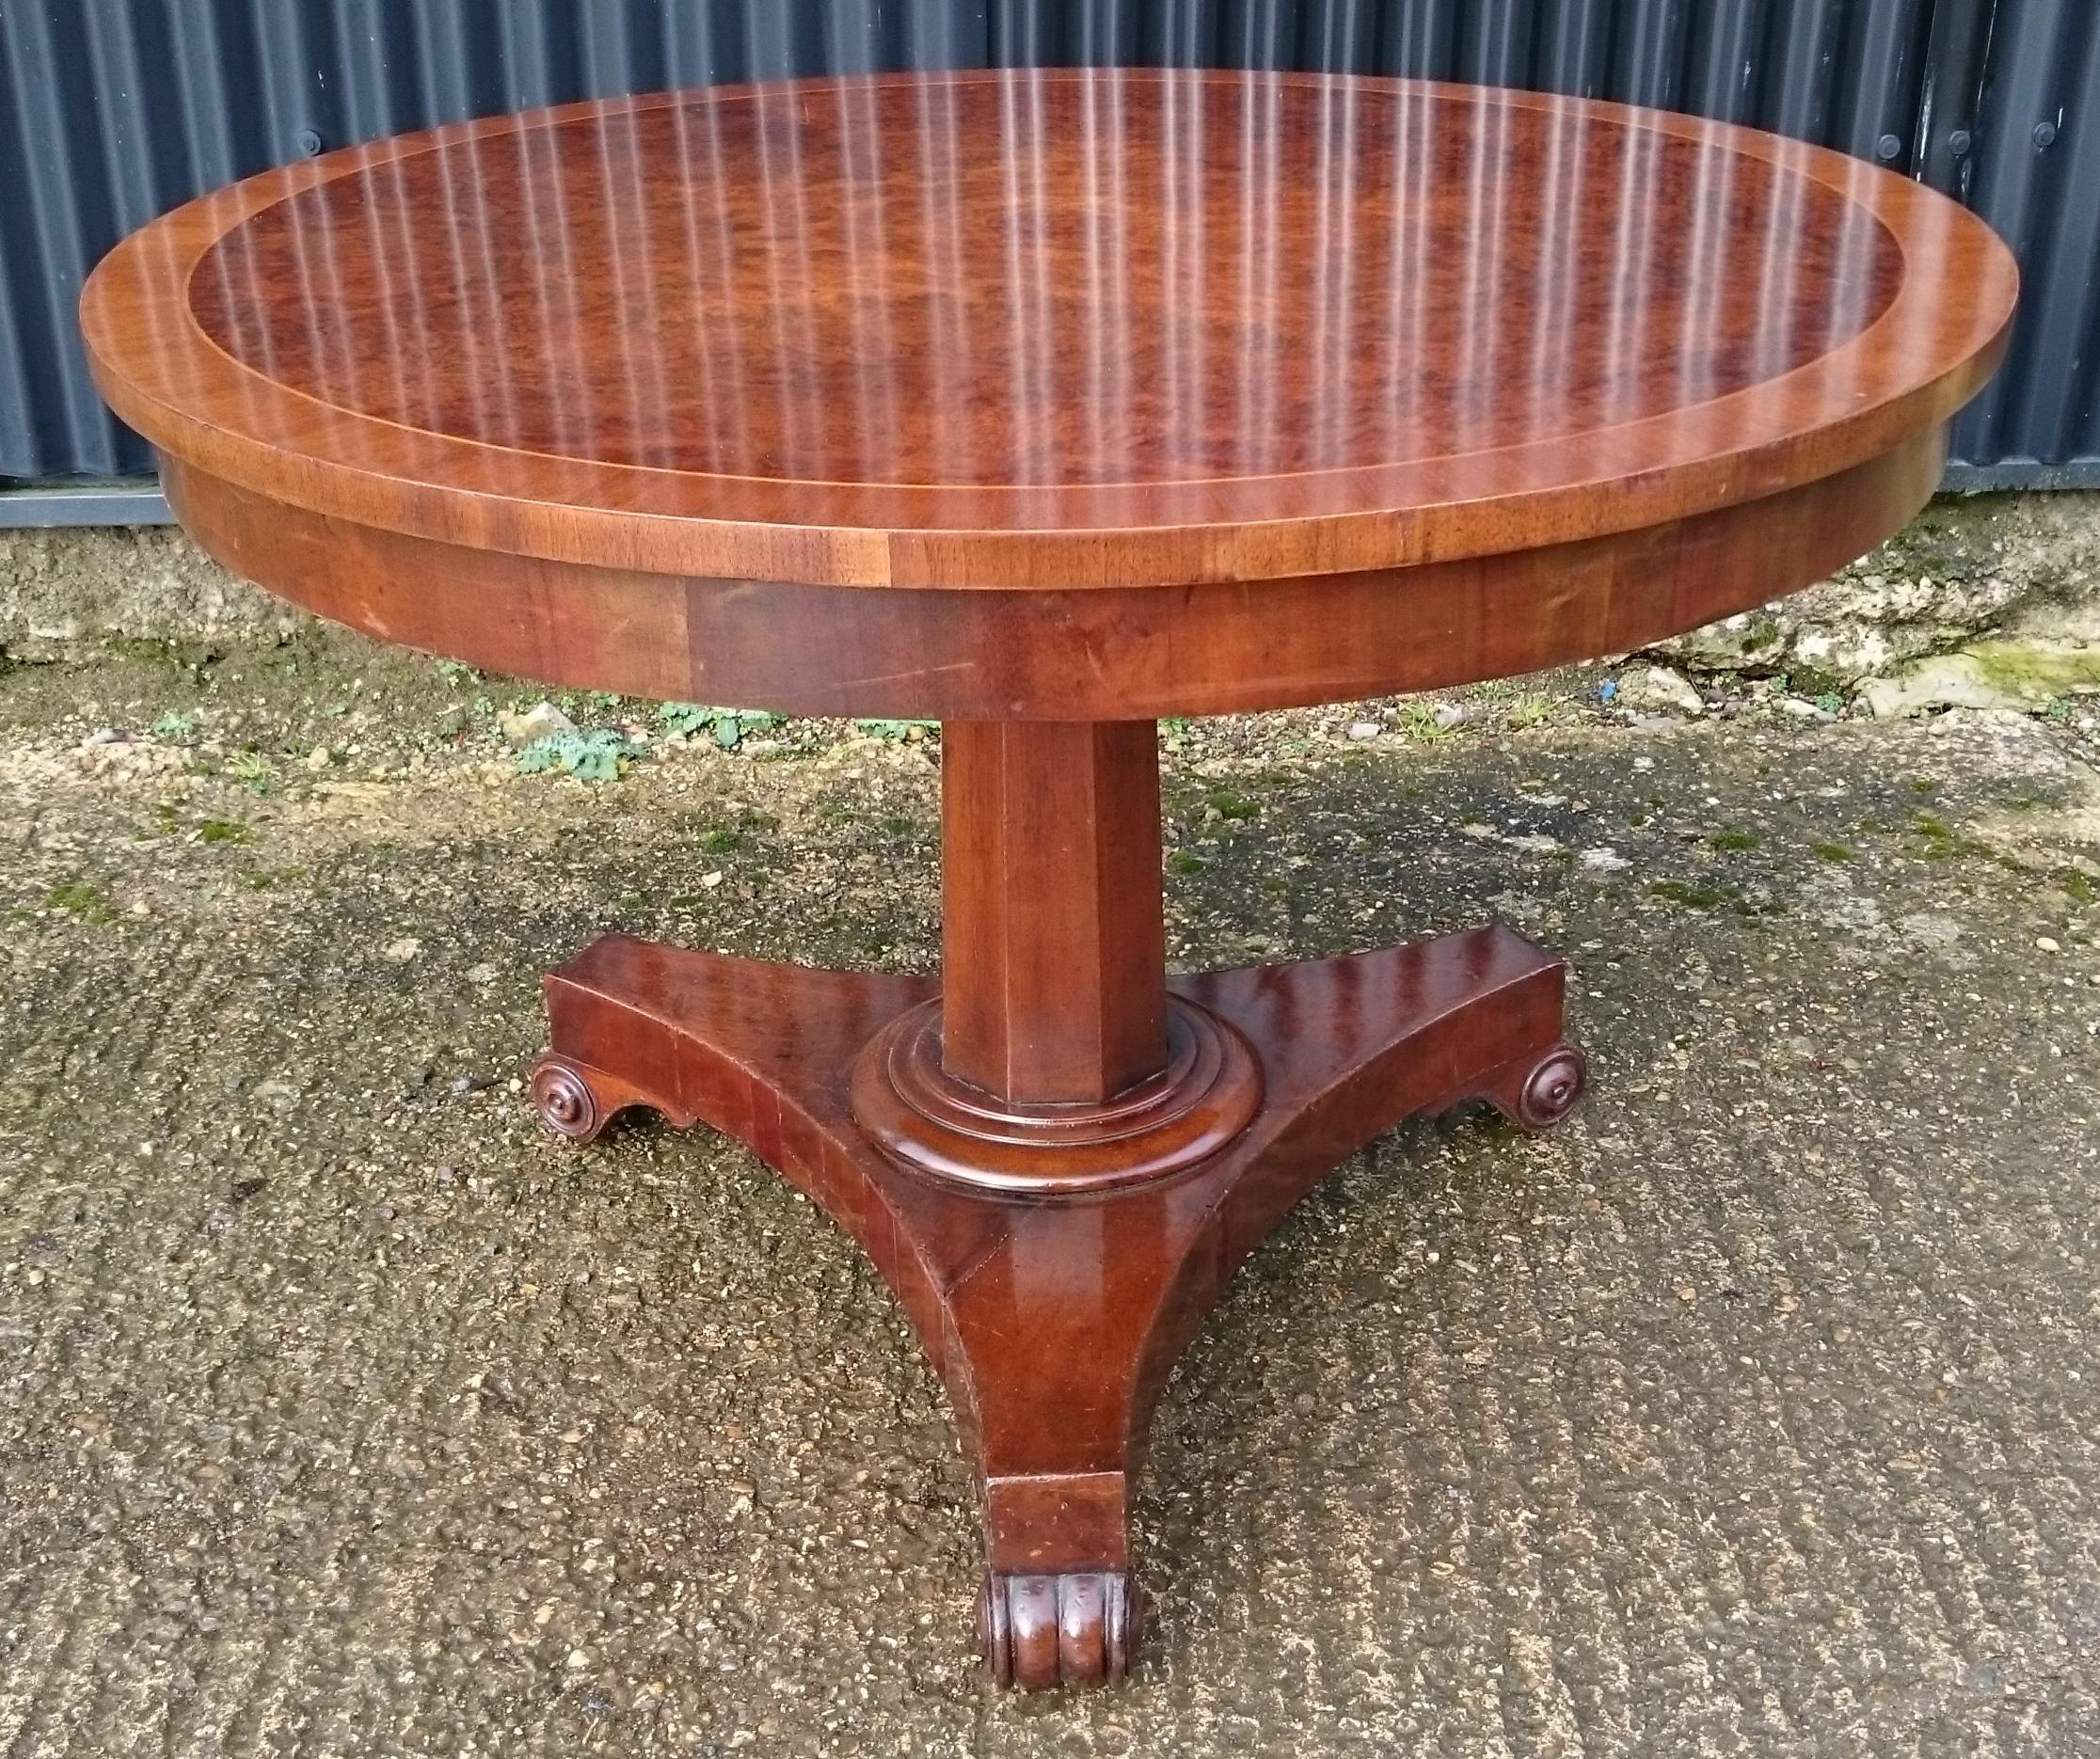 Early 19th century breakfast table base, the top replaced with a very fine bookmatched burr walnut surrounded with satin wood stringing and mahogany crossbanding. This is a very elegant table with slender base, good knee clearance and a